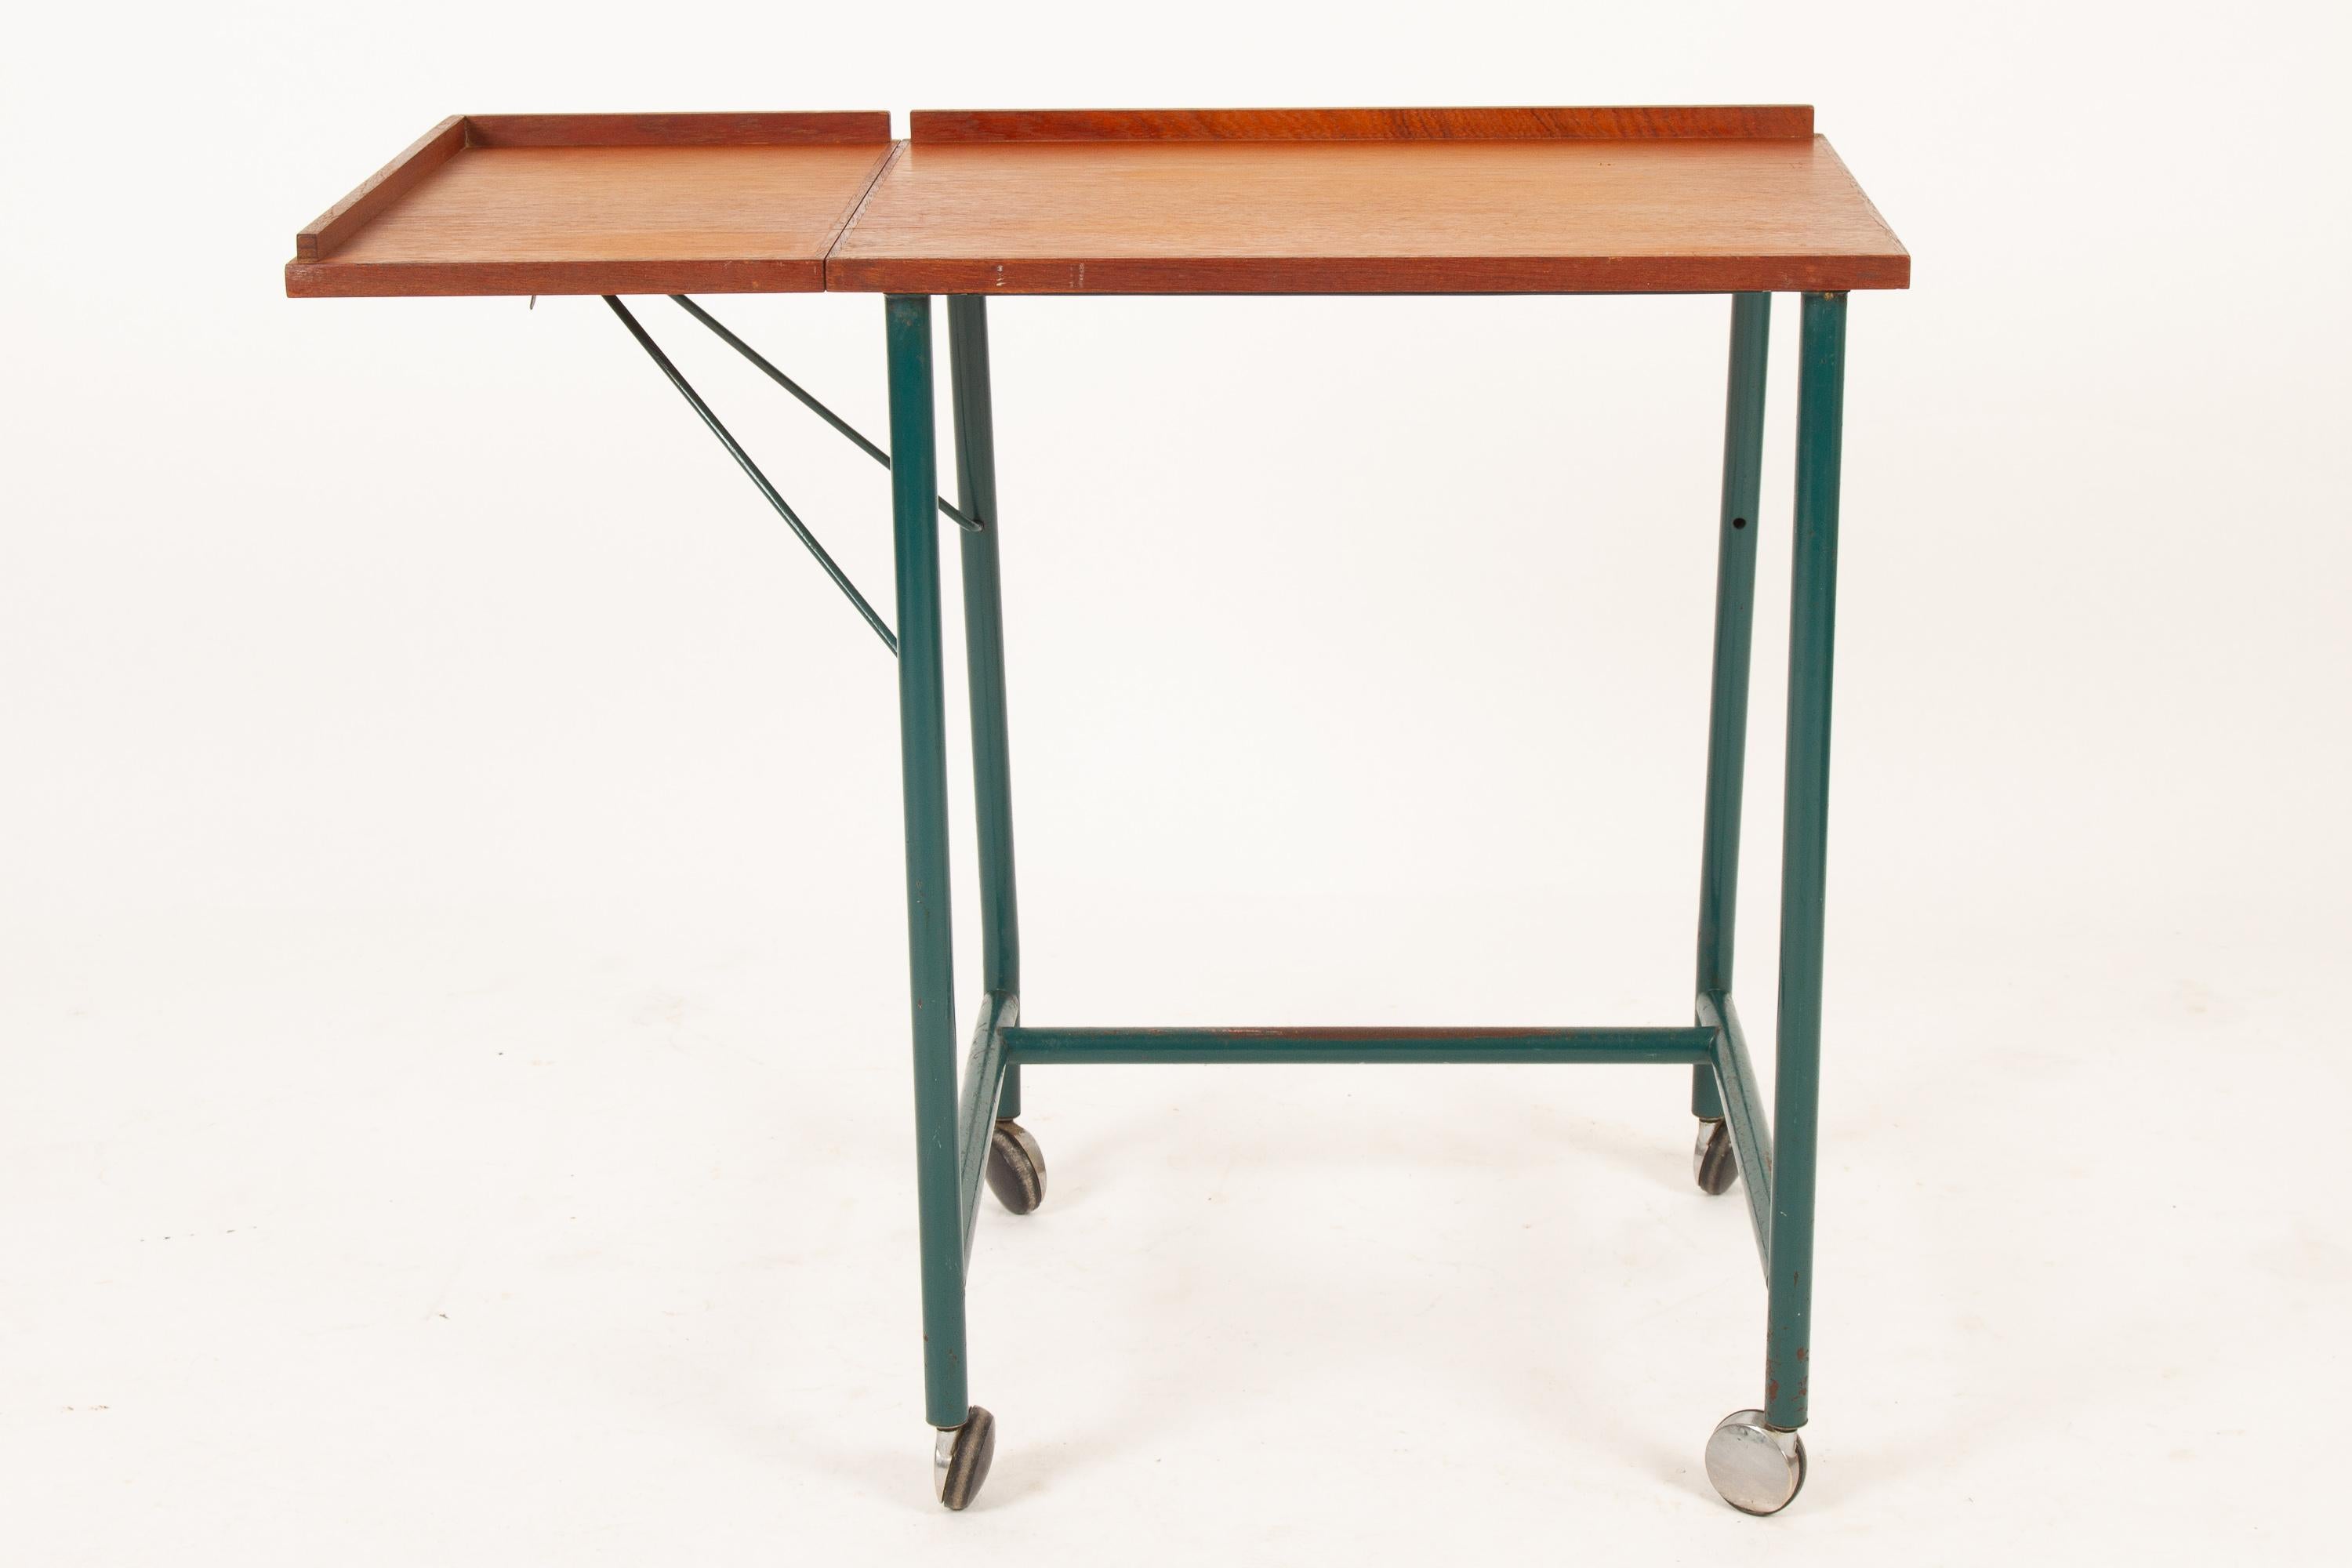 Mid-20th Century Danish Teak Side Table with Green Metal Frame, 1960s